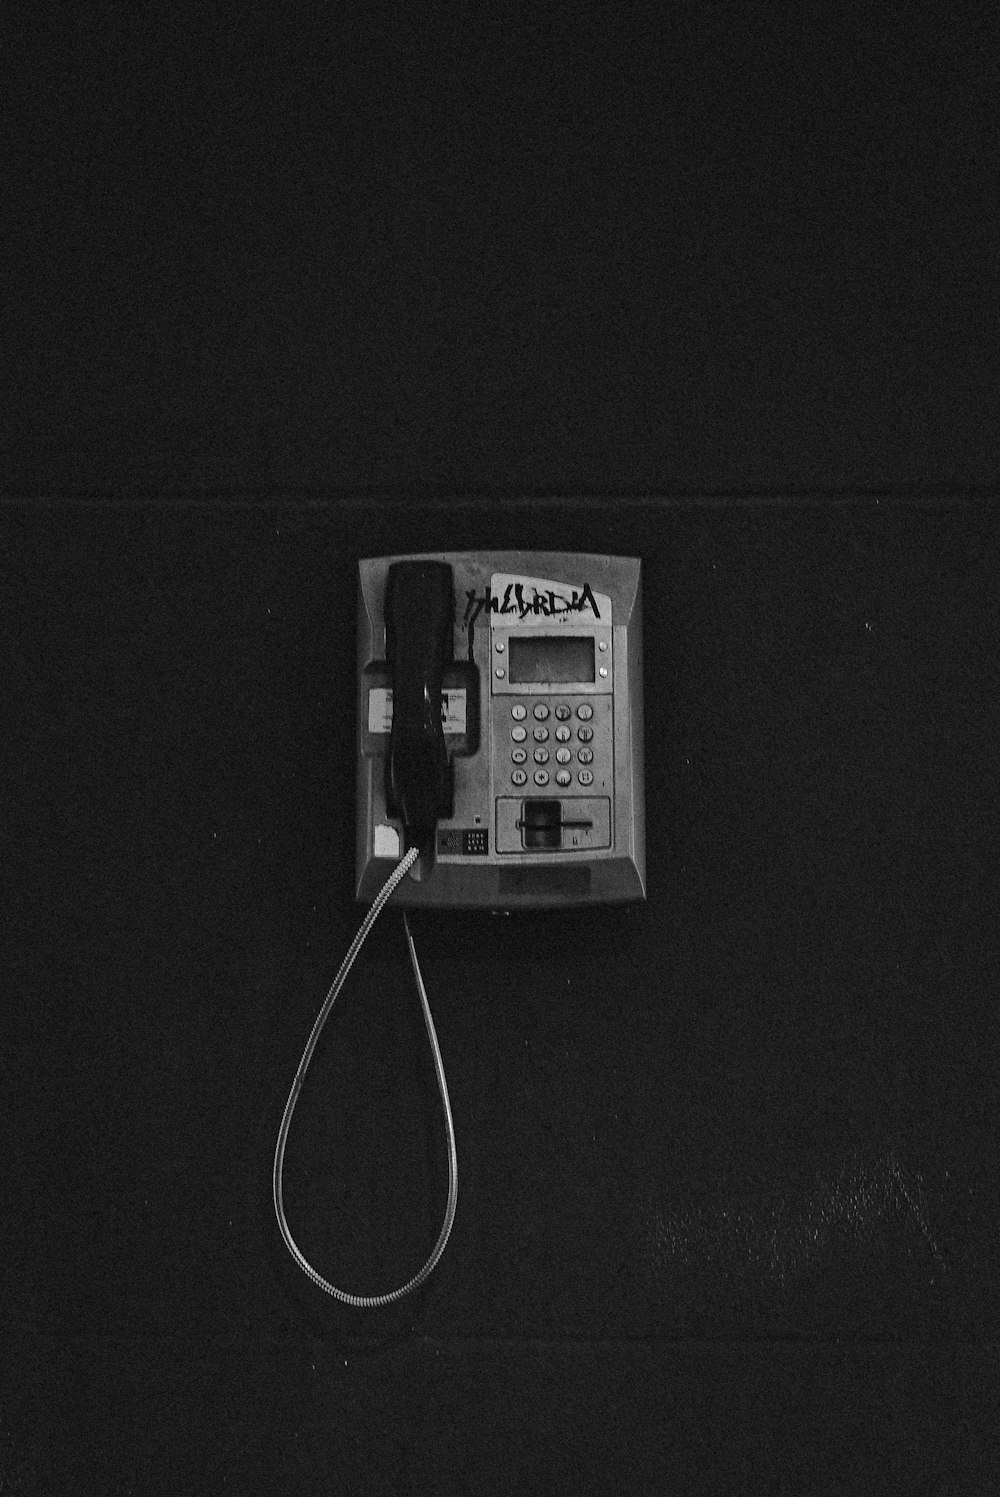 black and white telephone on black surface